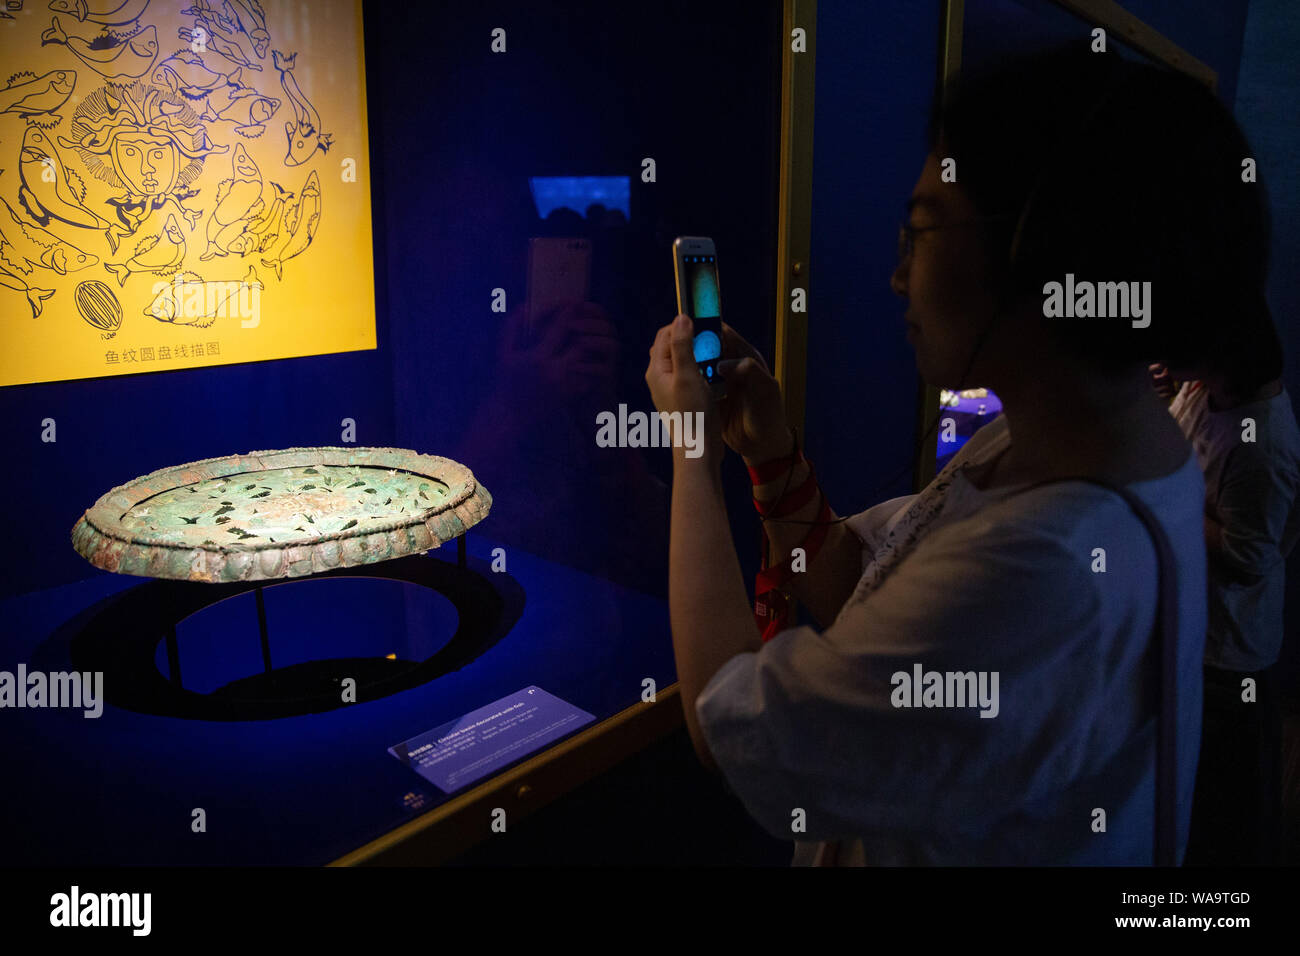 A visitor views treasures and relics from Afghan national treasures during an exhibition at a museum in Nanjing city, east China's Jiangsu province, 8 Stock Photo